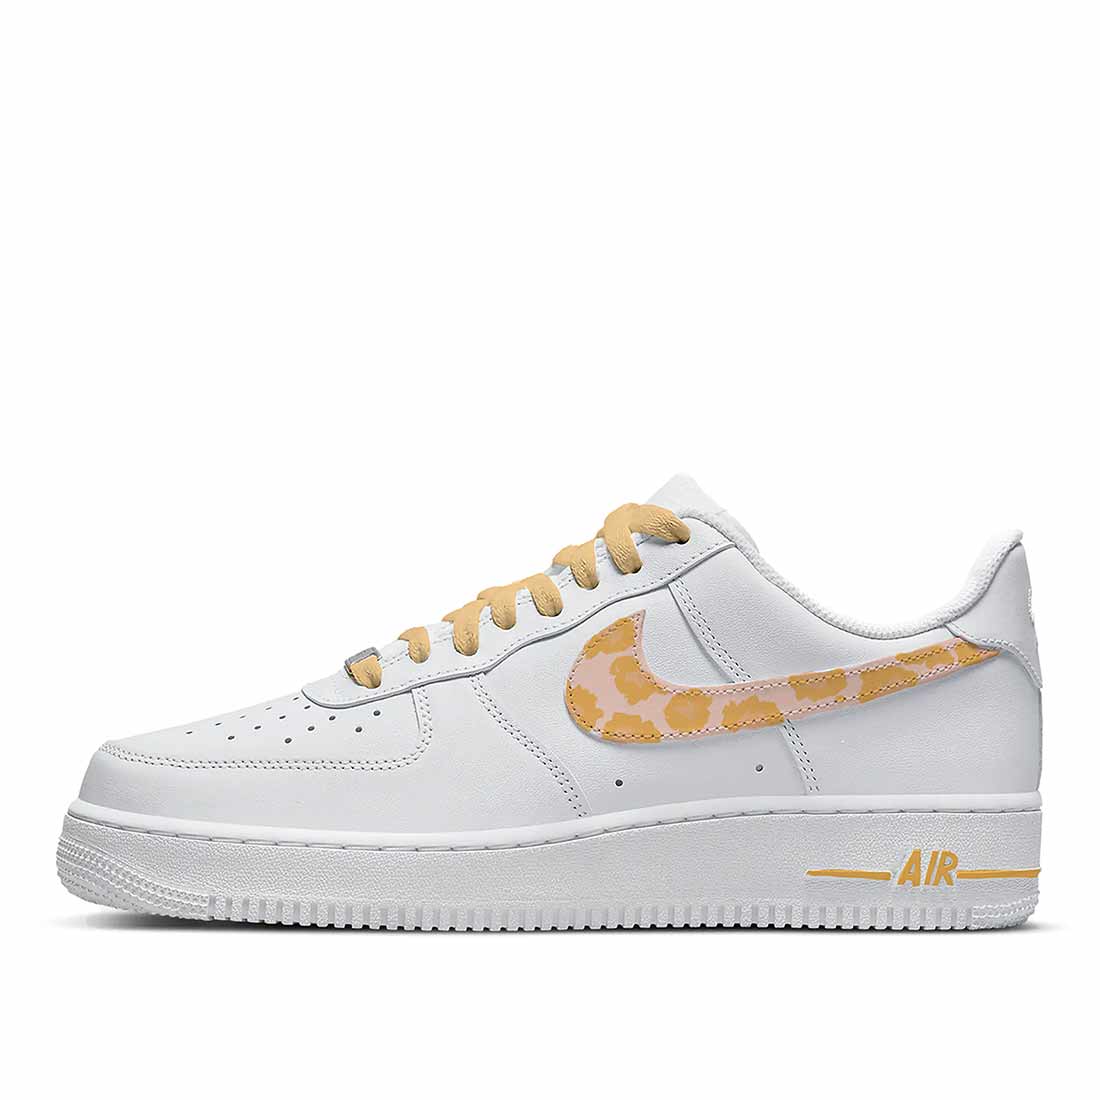 Nike bianche AF1 con swoosh animalier giallo